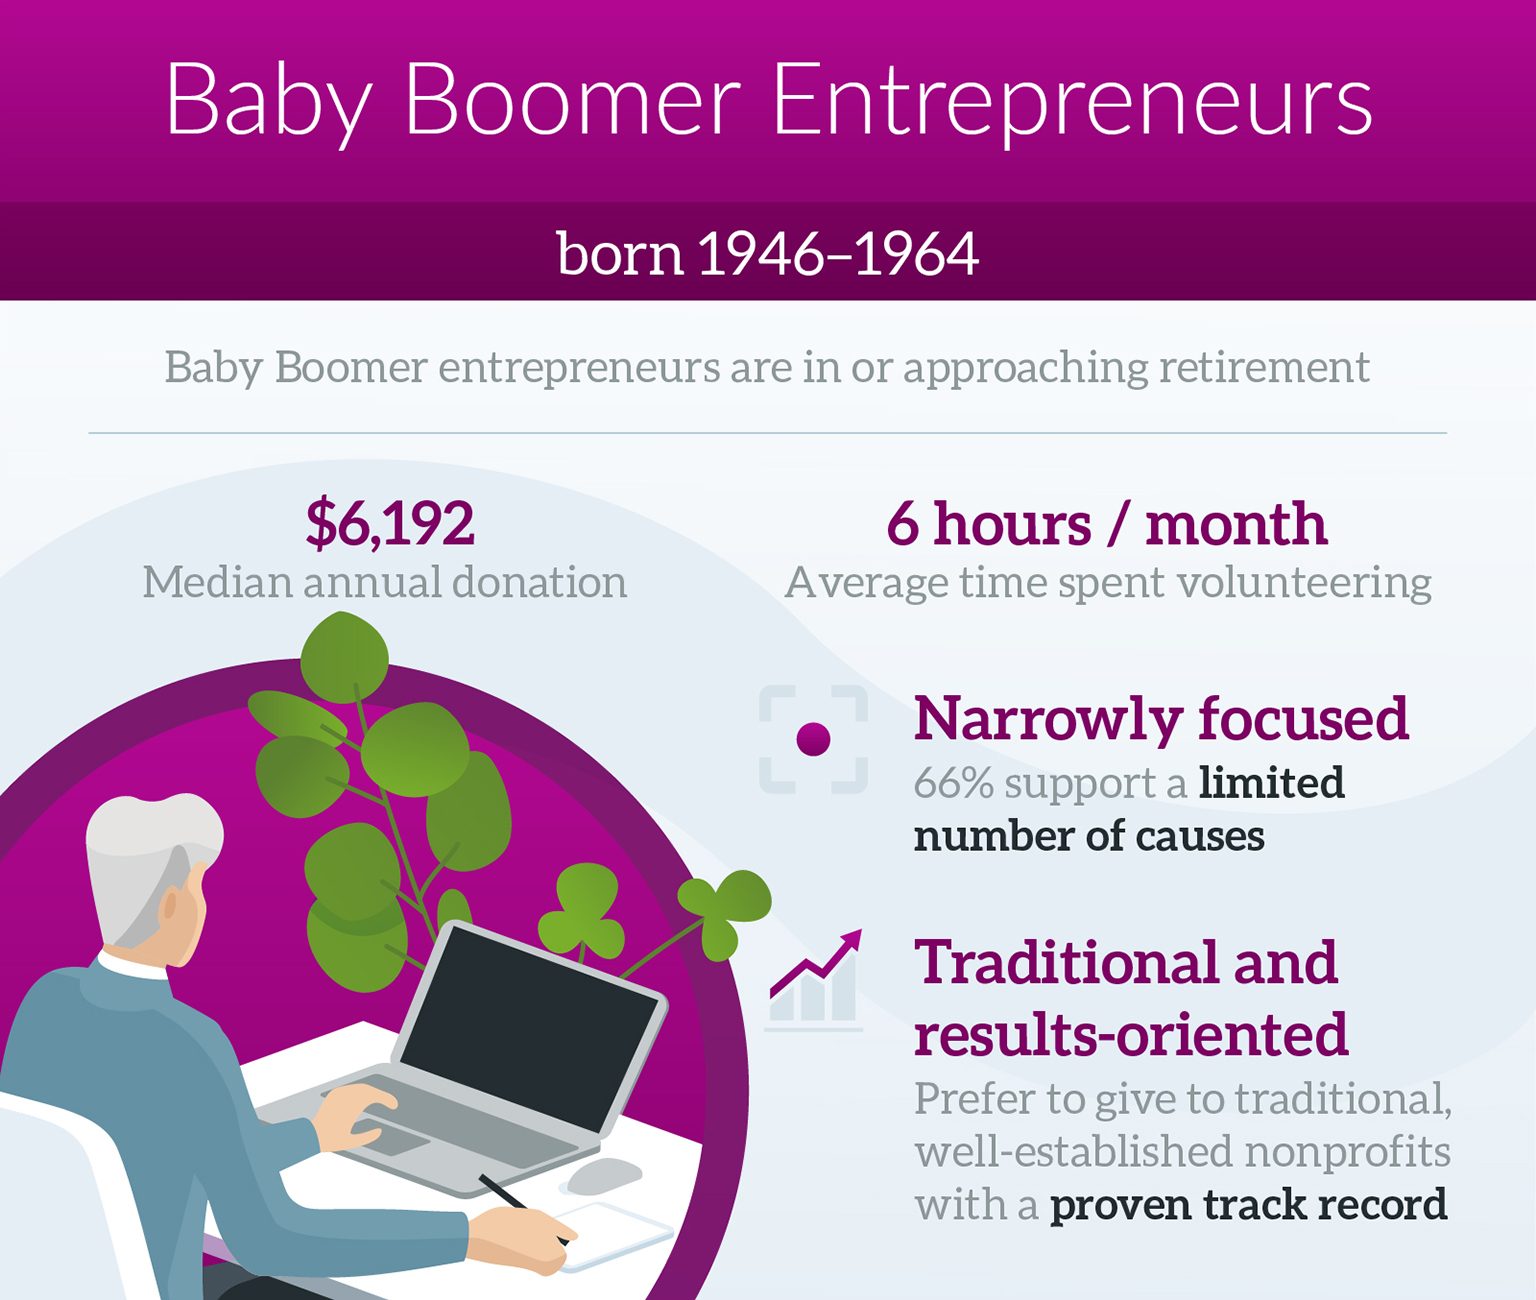 Graphic describing Baby Boomer entrepreneurs and how they approach philanthropy. They support a limited set of causes and prefer to give to traditional nonprofits.